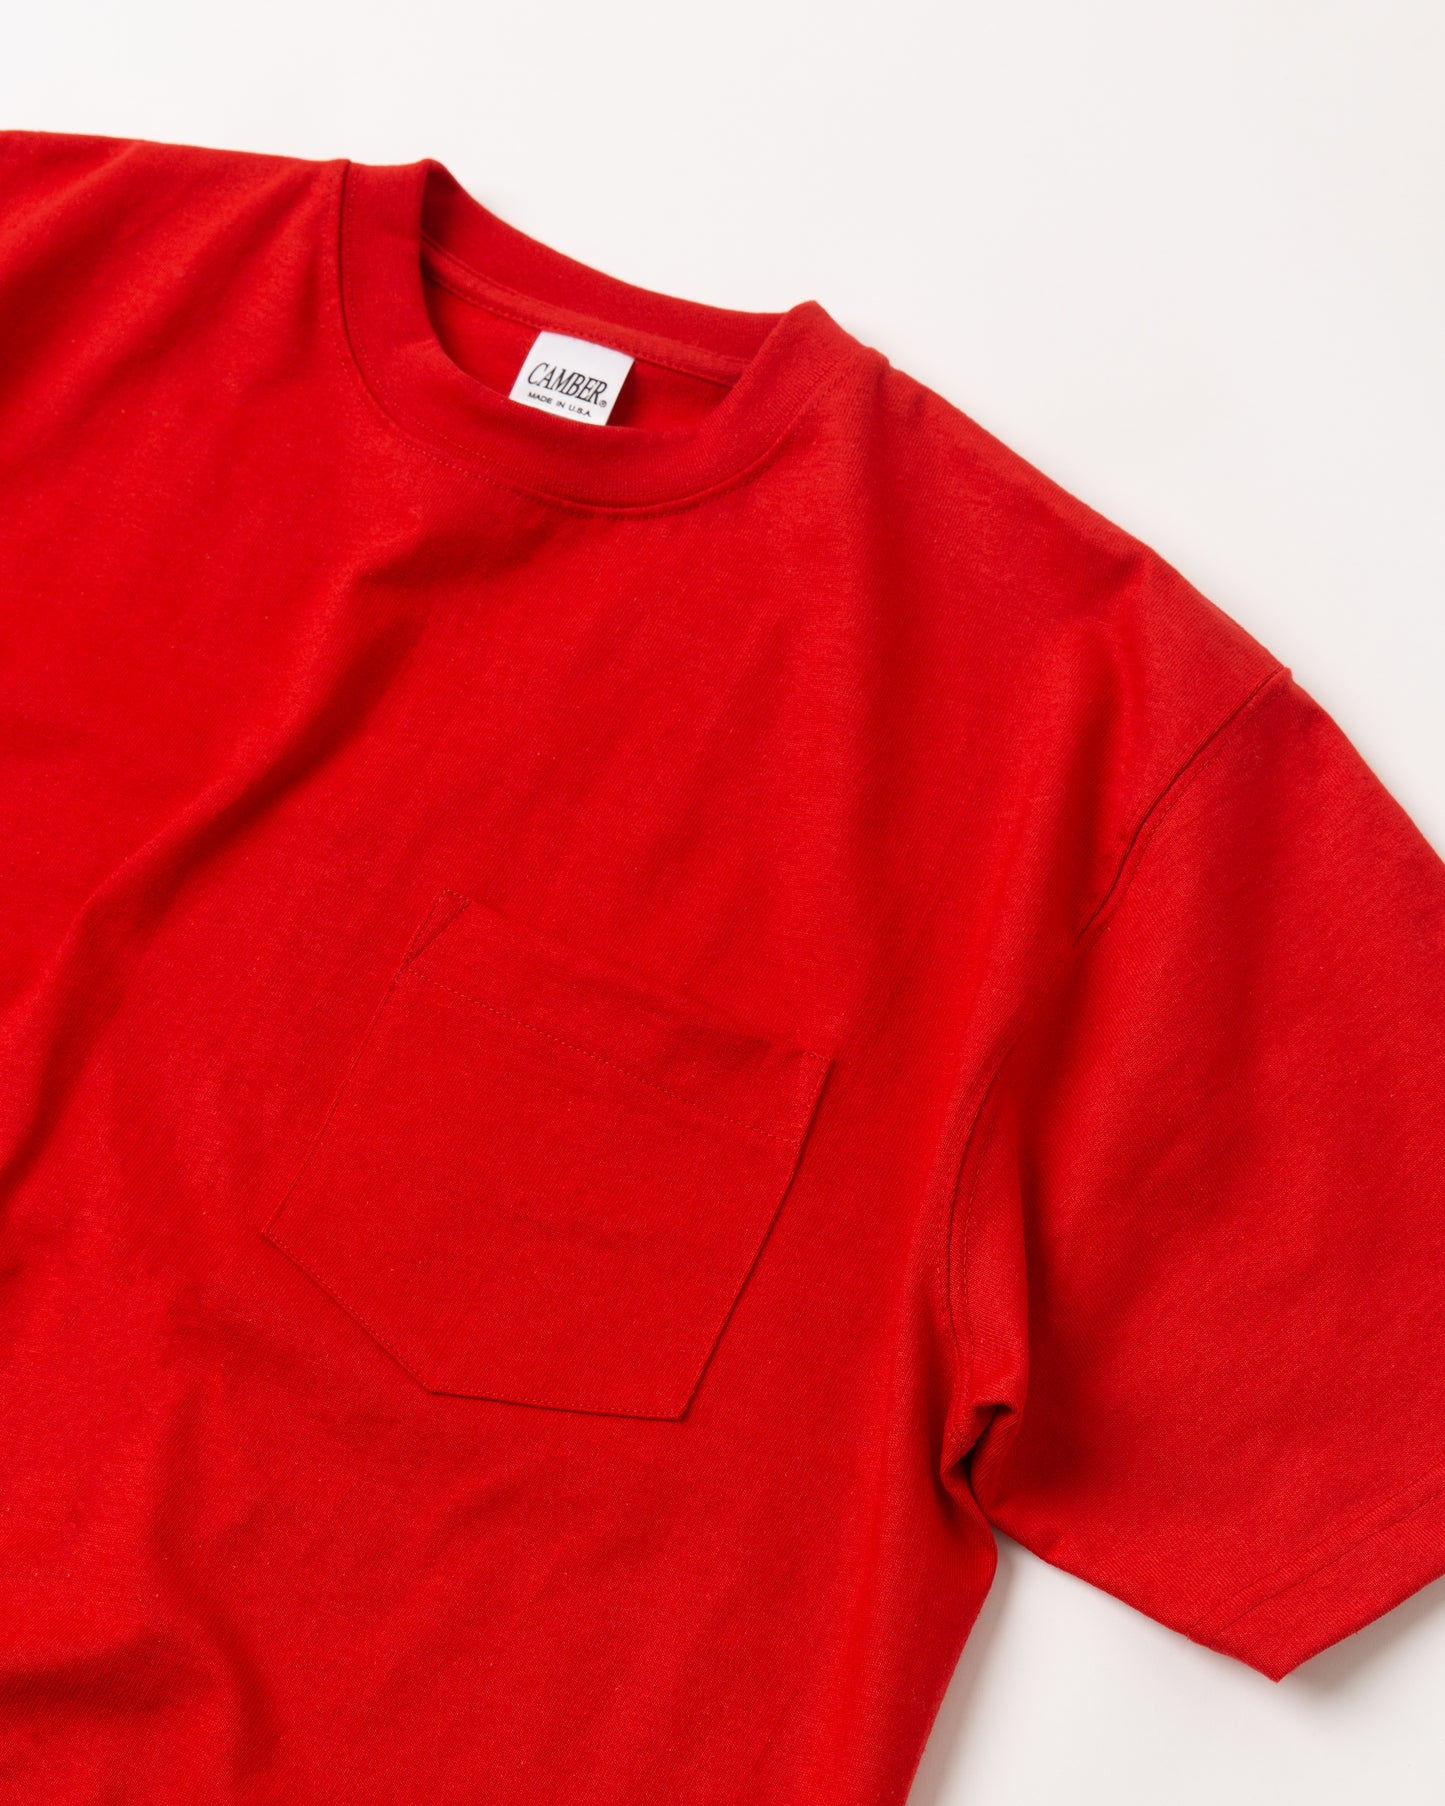 CAMBER USA MAX-WEIGHT POCKET TEE: RED